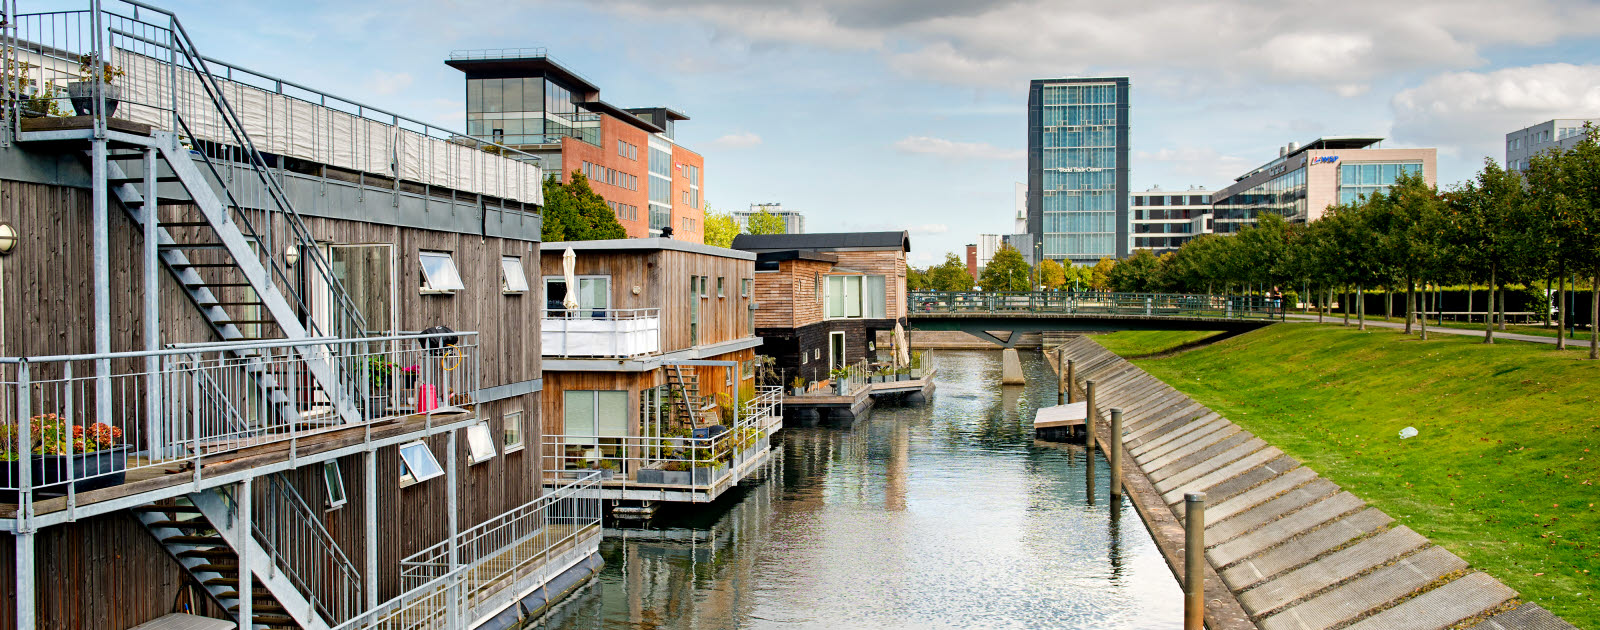 The Western Harbour is a district in Malmö that has in recent years undergone a complete transformation from an industrial area to a beautiful architectural neighbourhood with a sustainable focus.